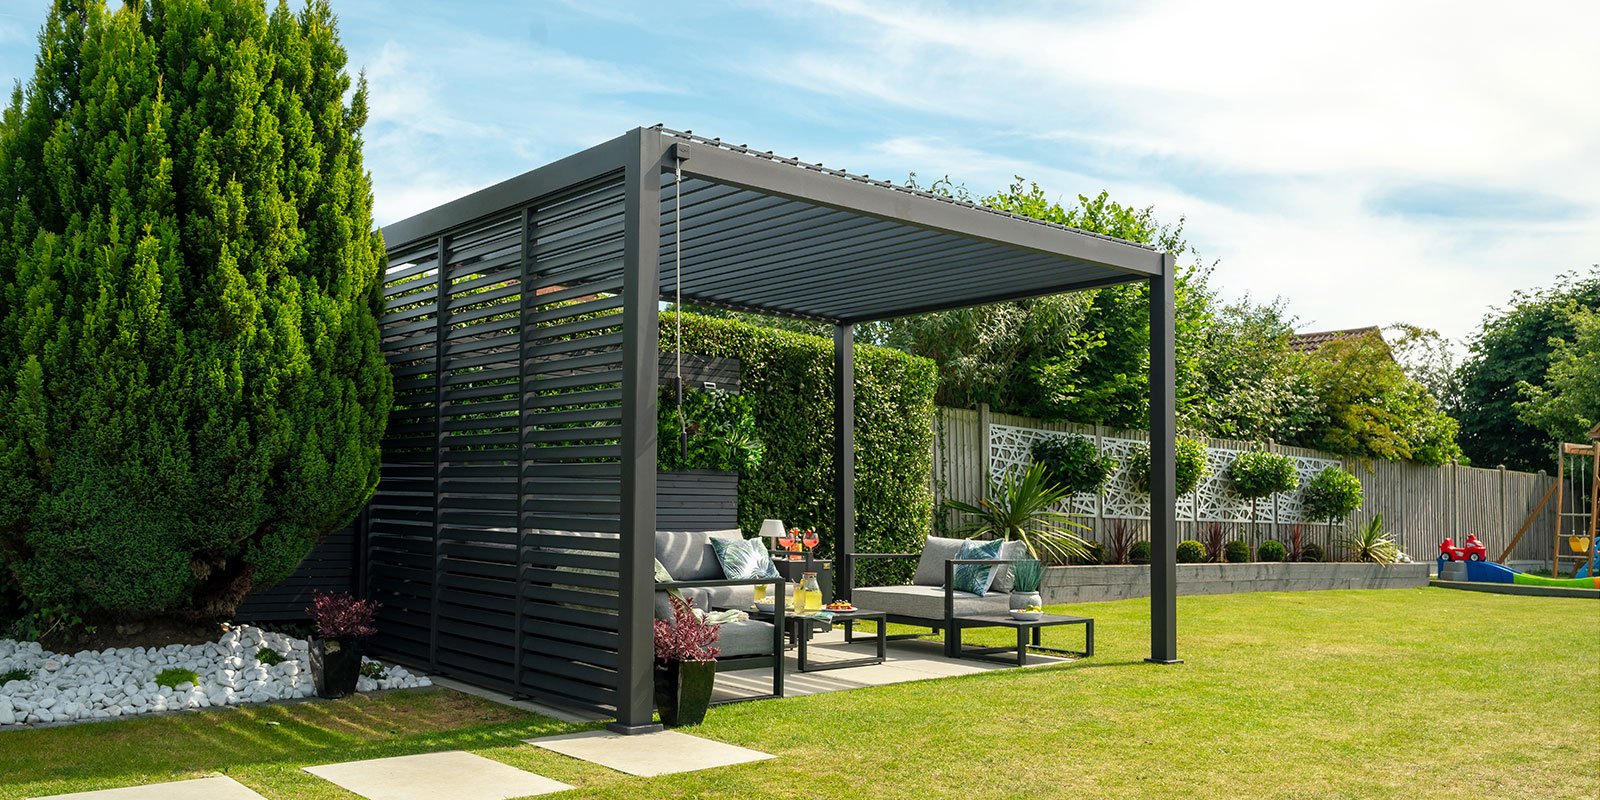 What You Need To Know About Our Pergolas Before Buying